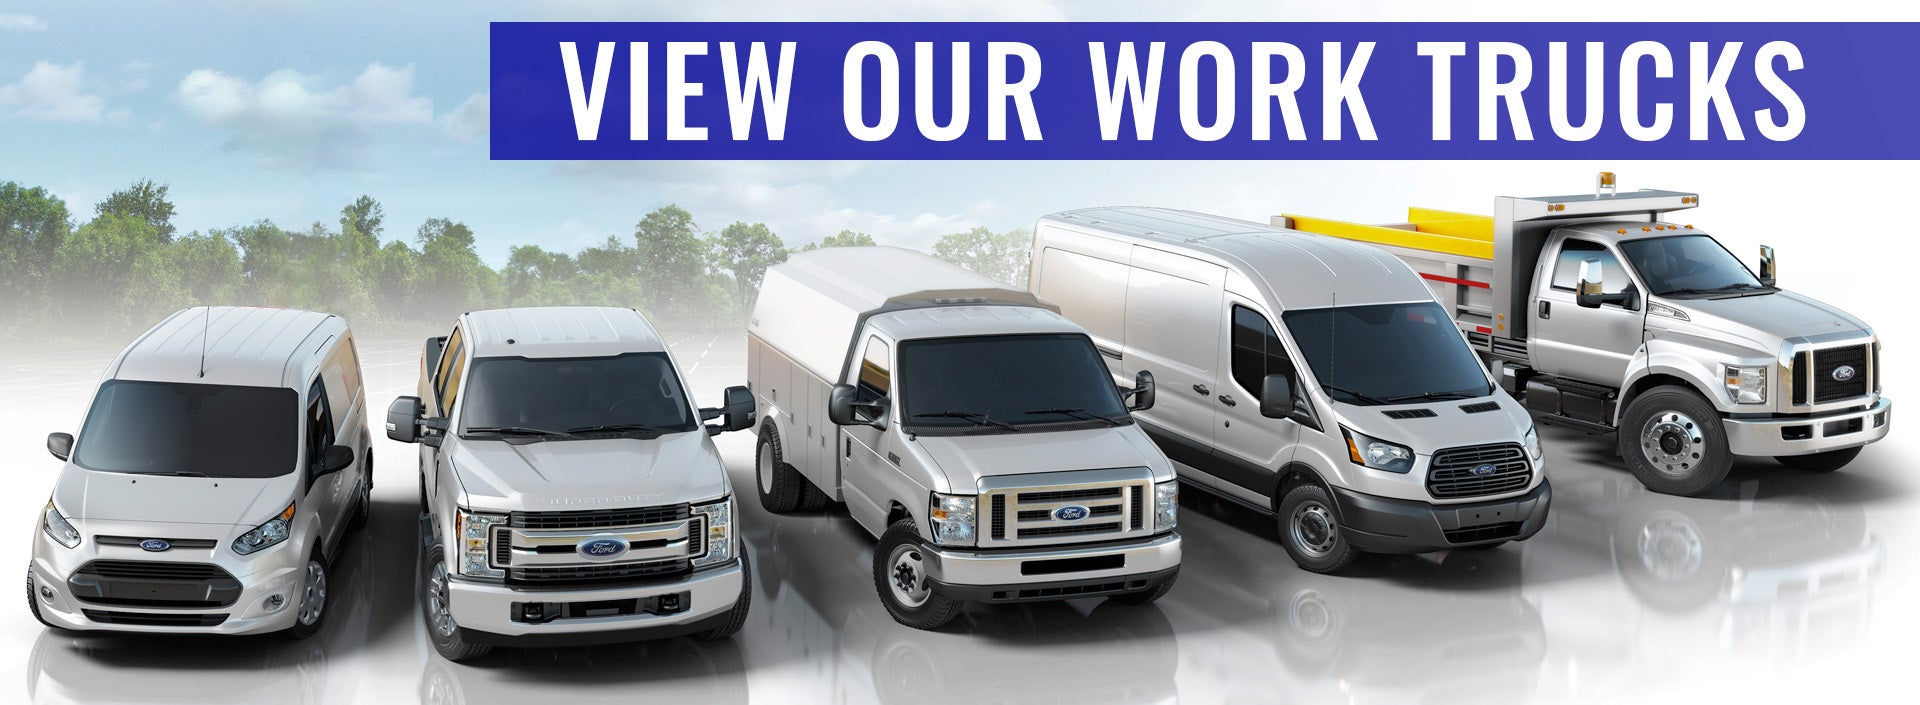 View Our Work trucks